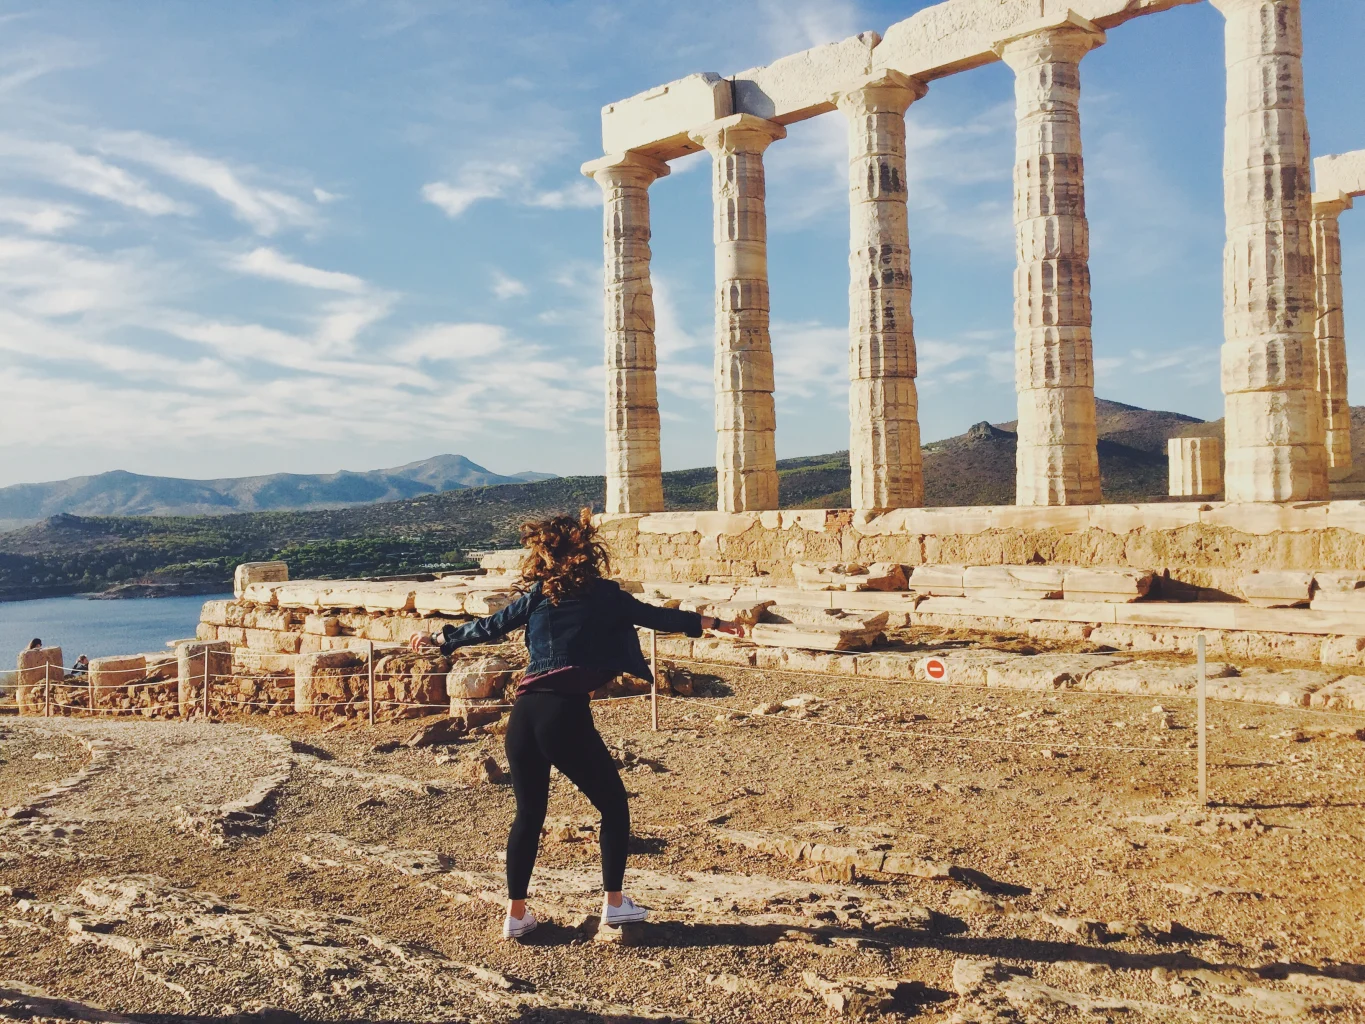 A student dancing near pillars on the Acropolis in Greece.